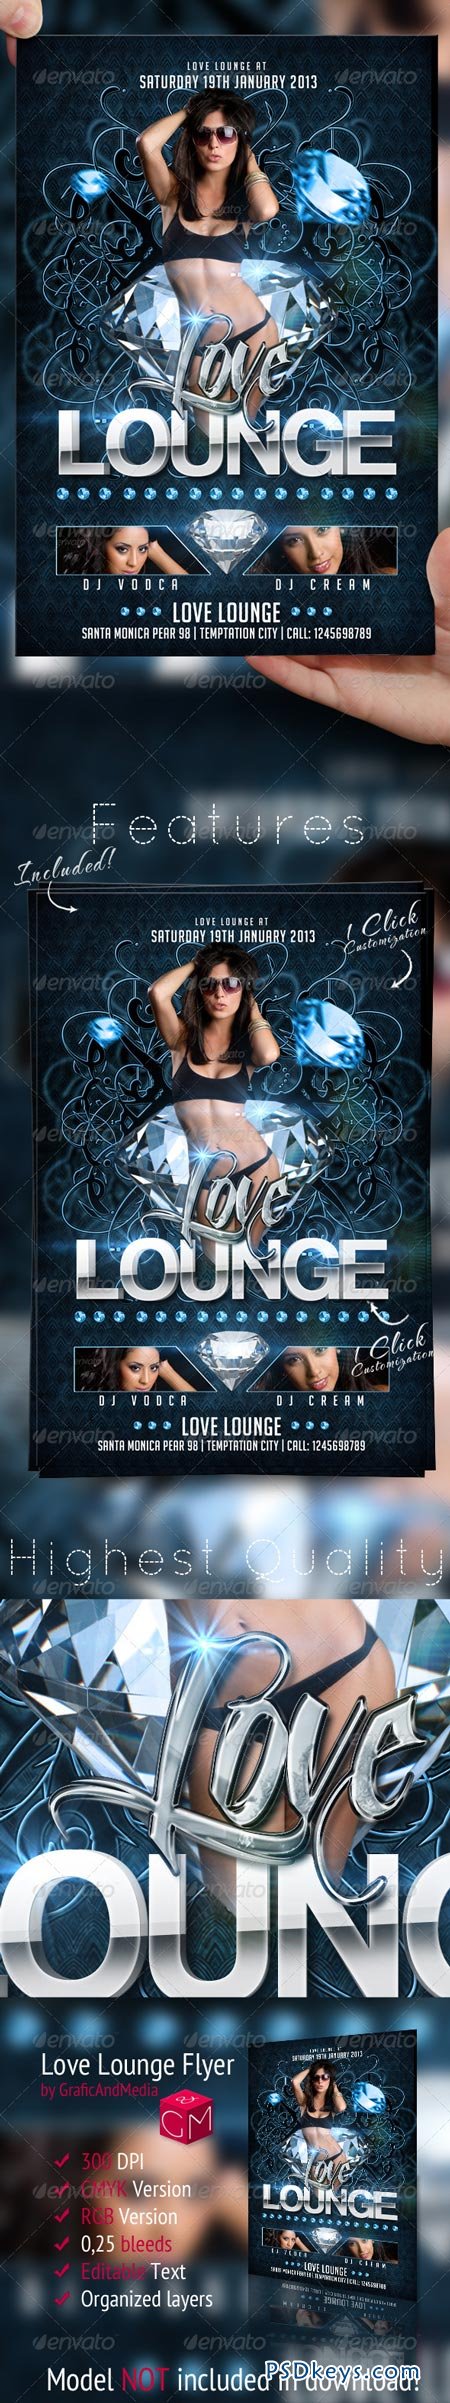 Love Lounge Flyer Template 3540419